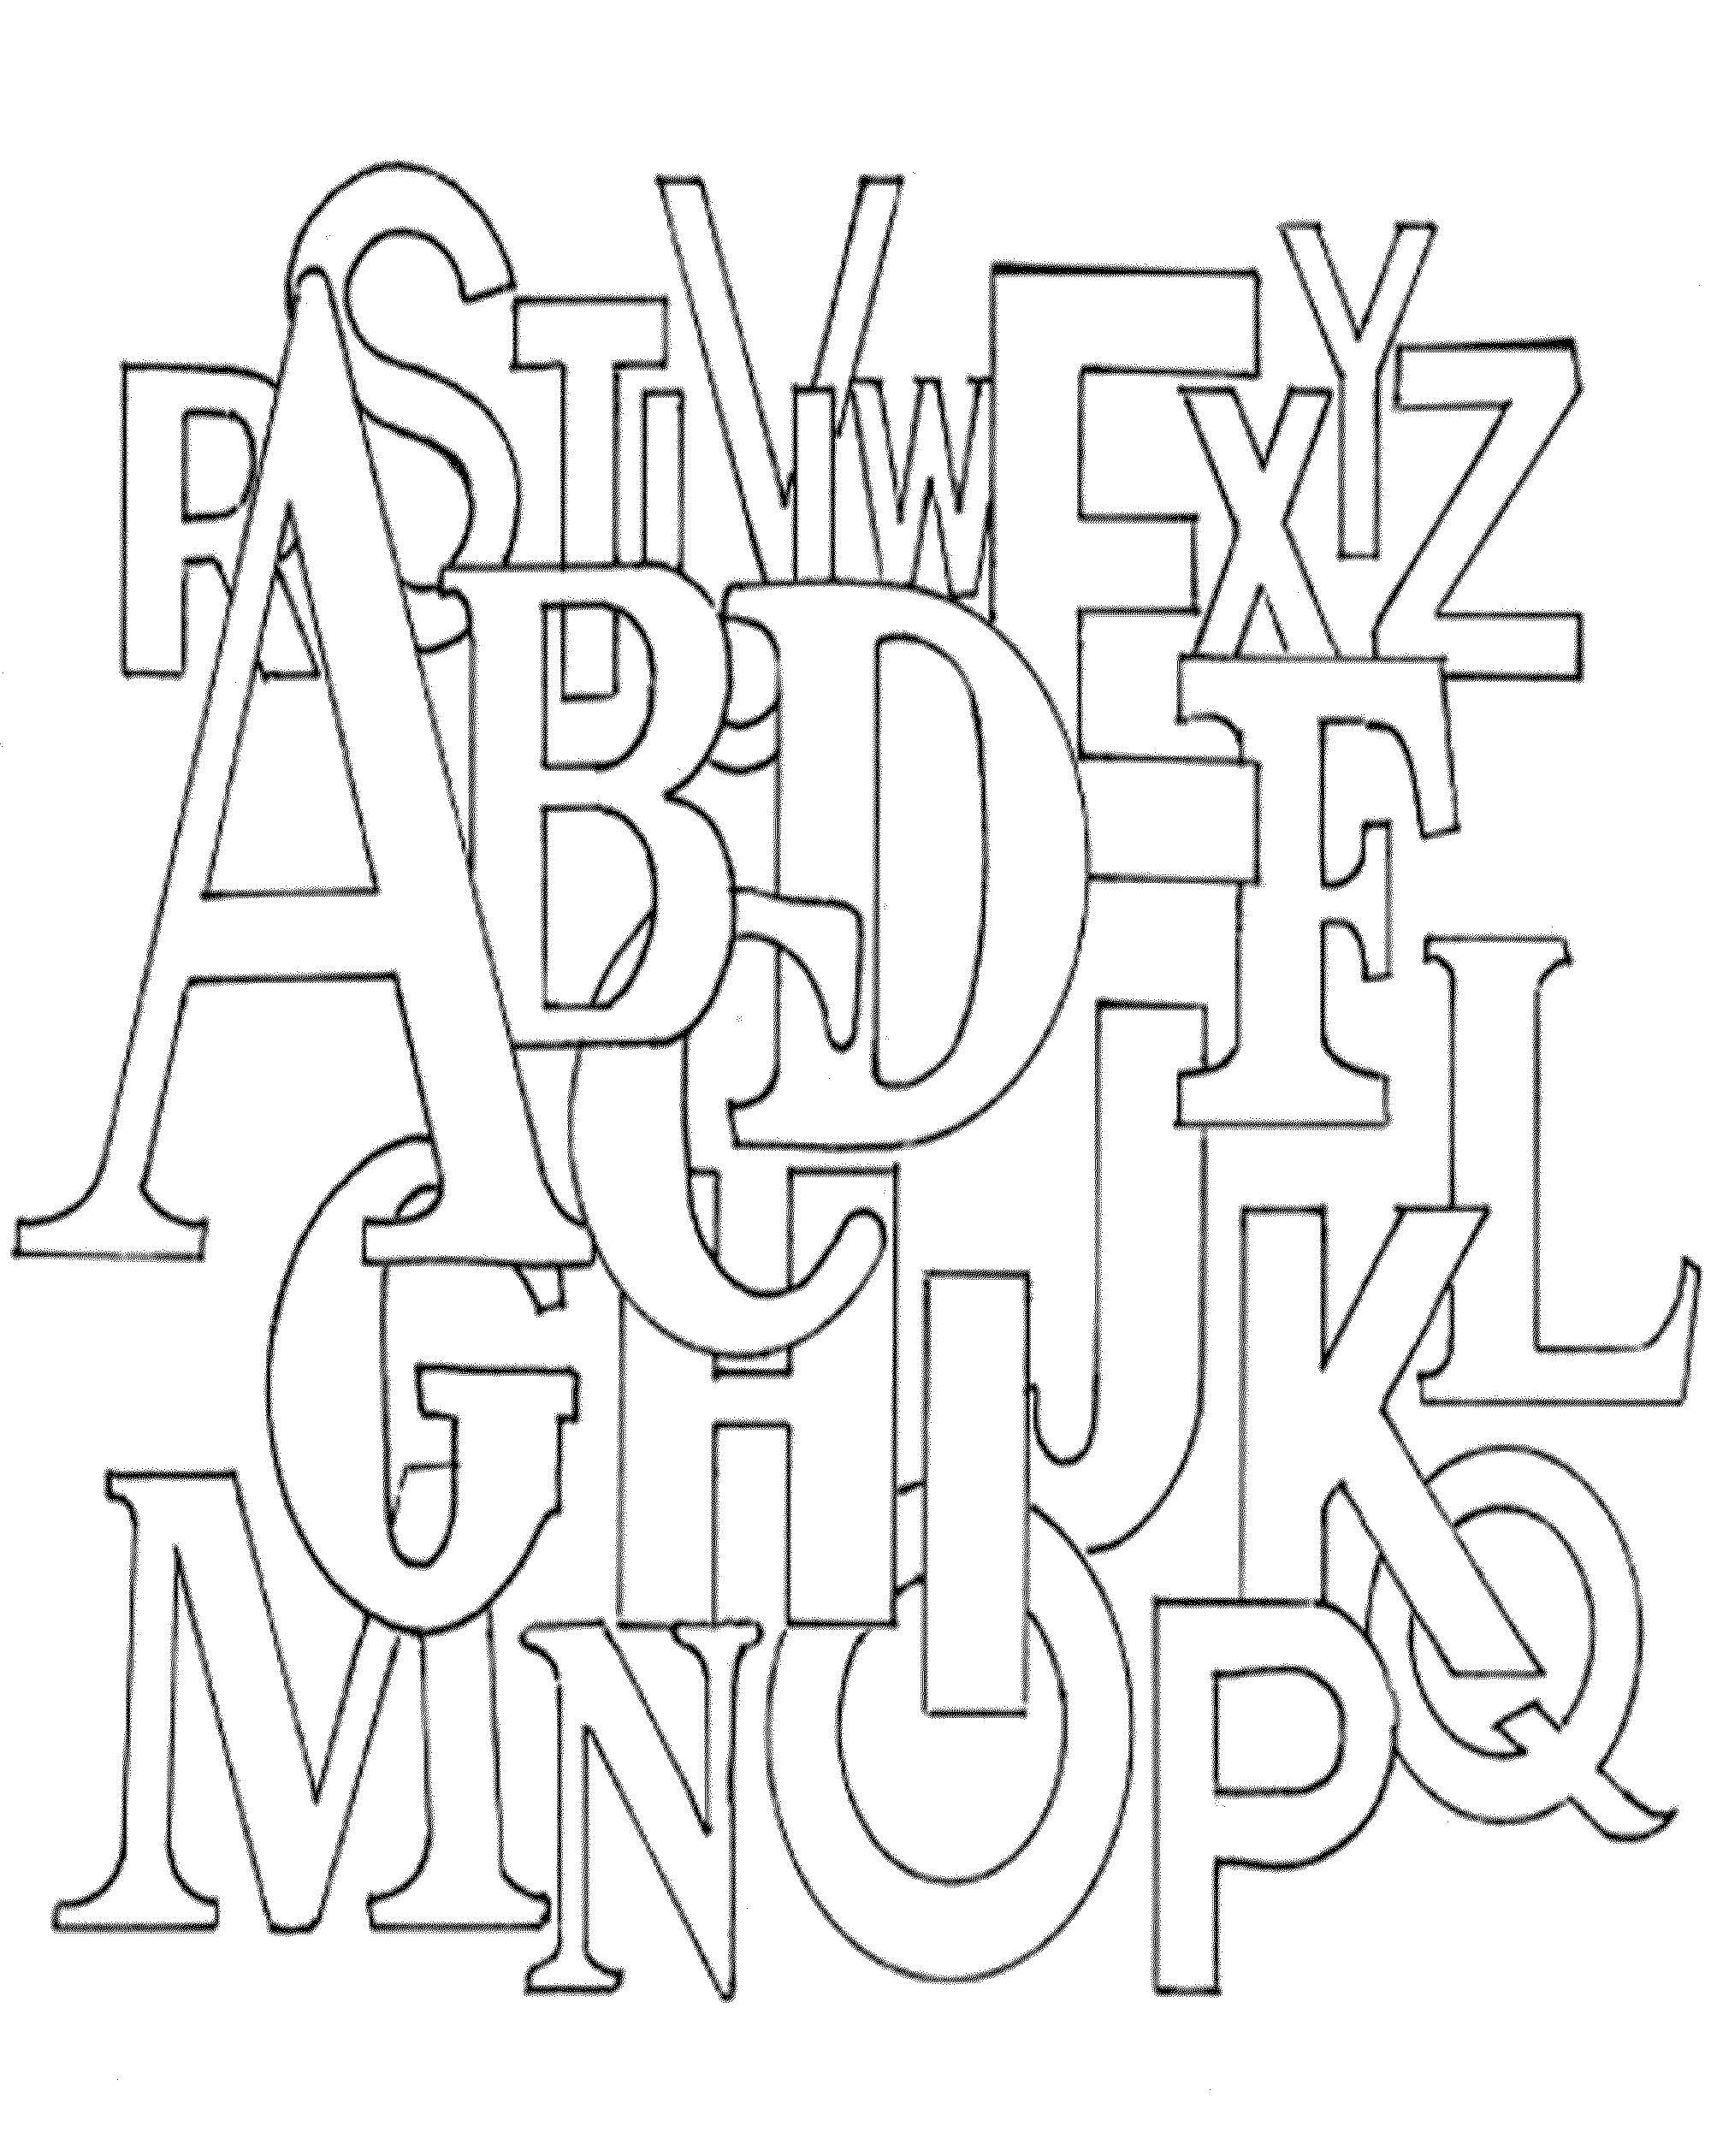 Coloring English alphabet. Category English alphabet. Tags:  The alphabet, letters.